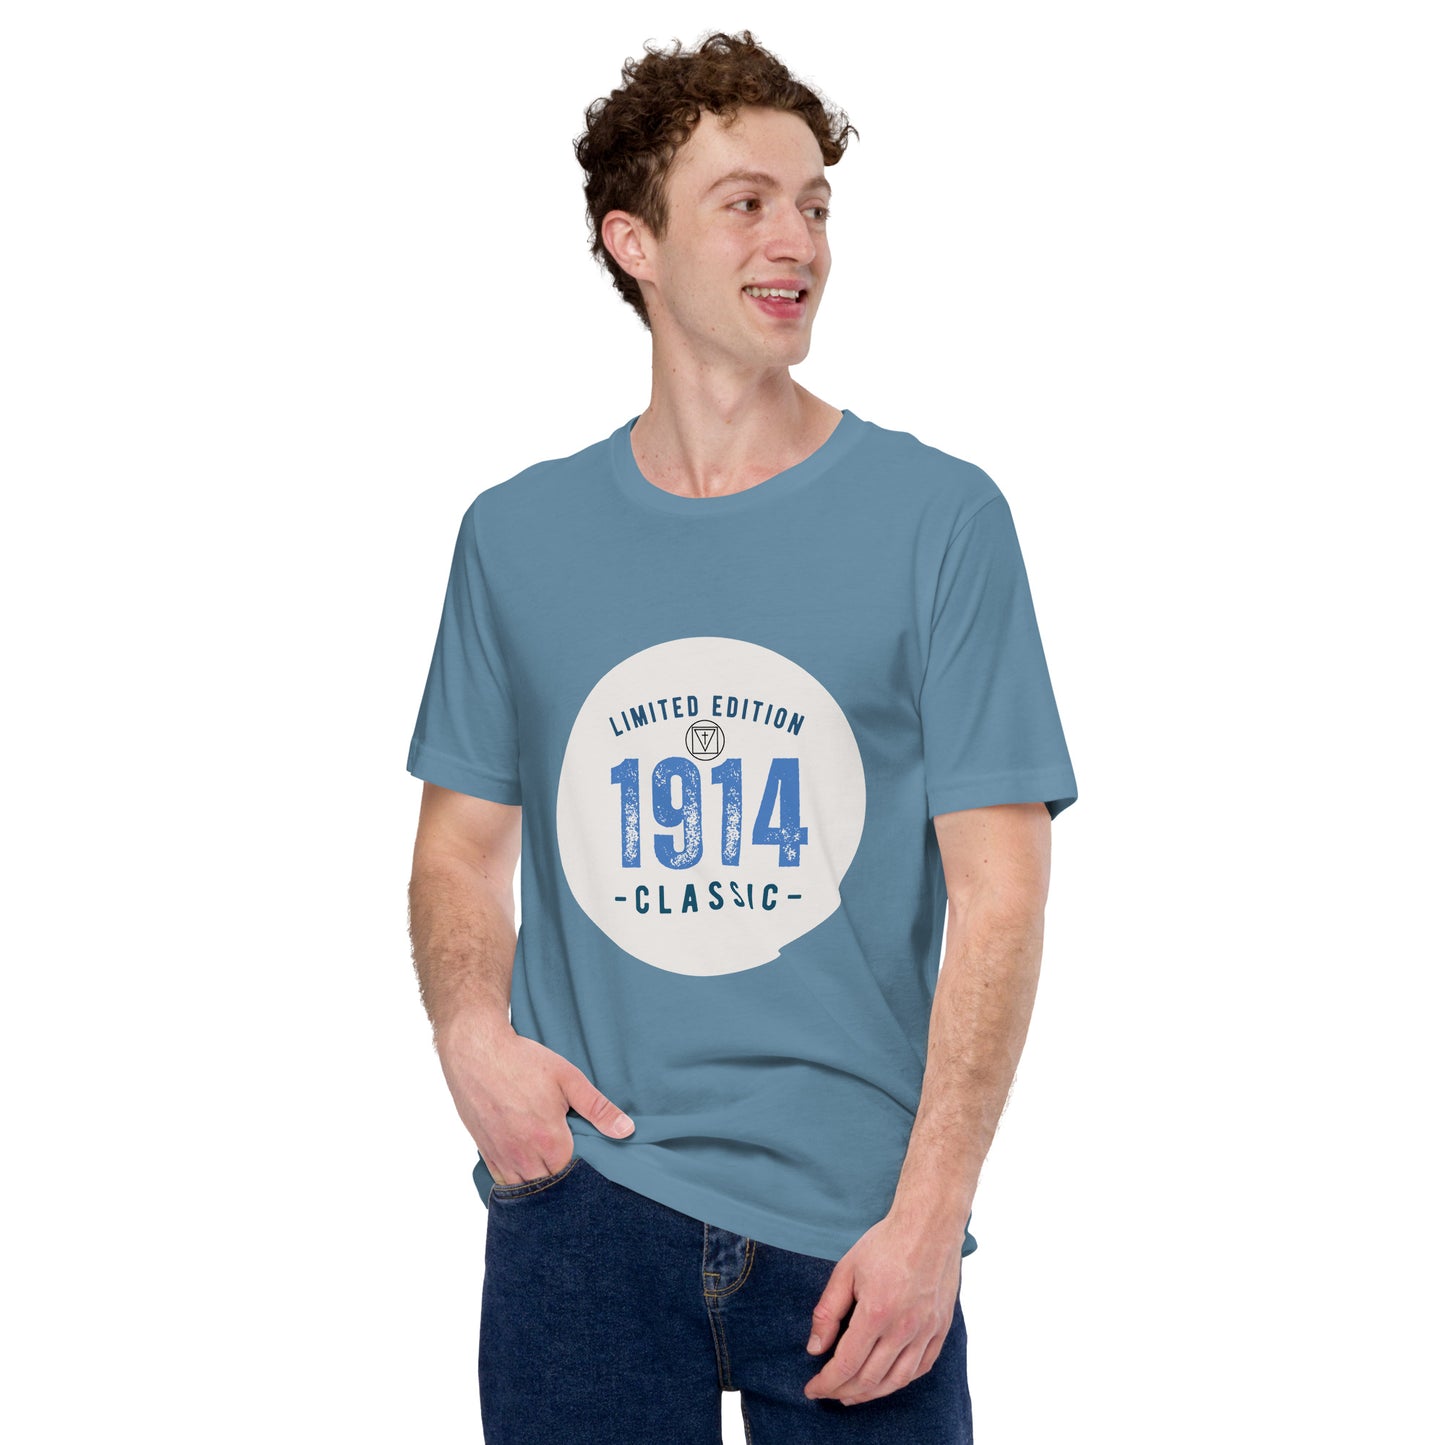 Limited Edition 1914 t-shirt